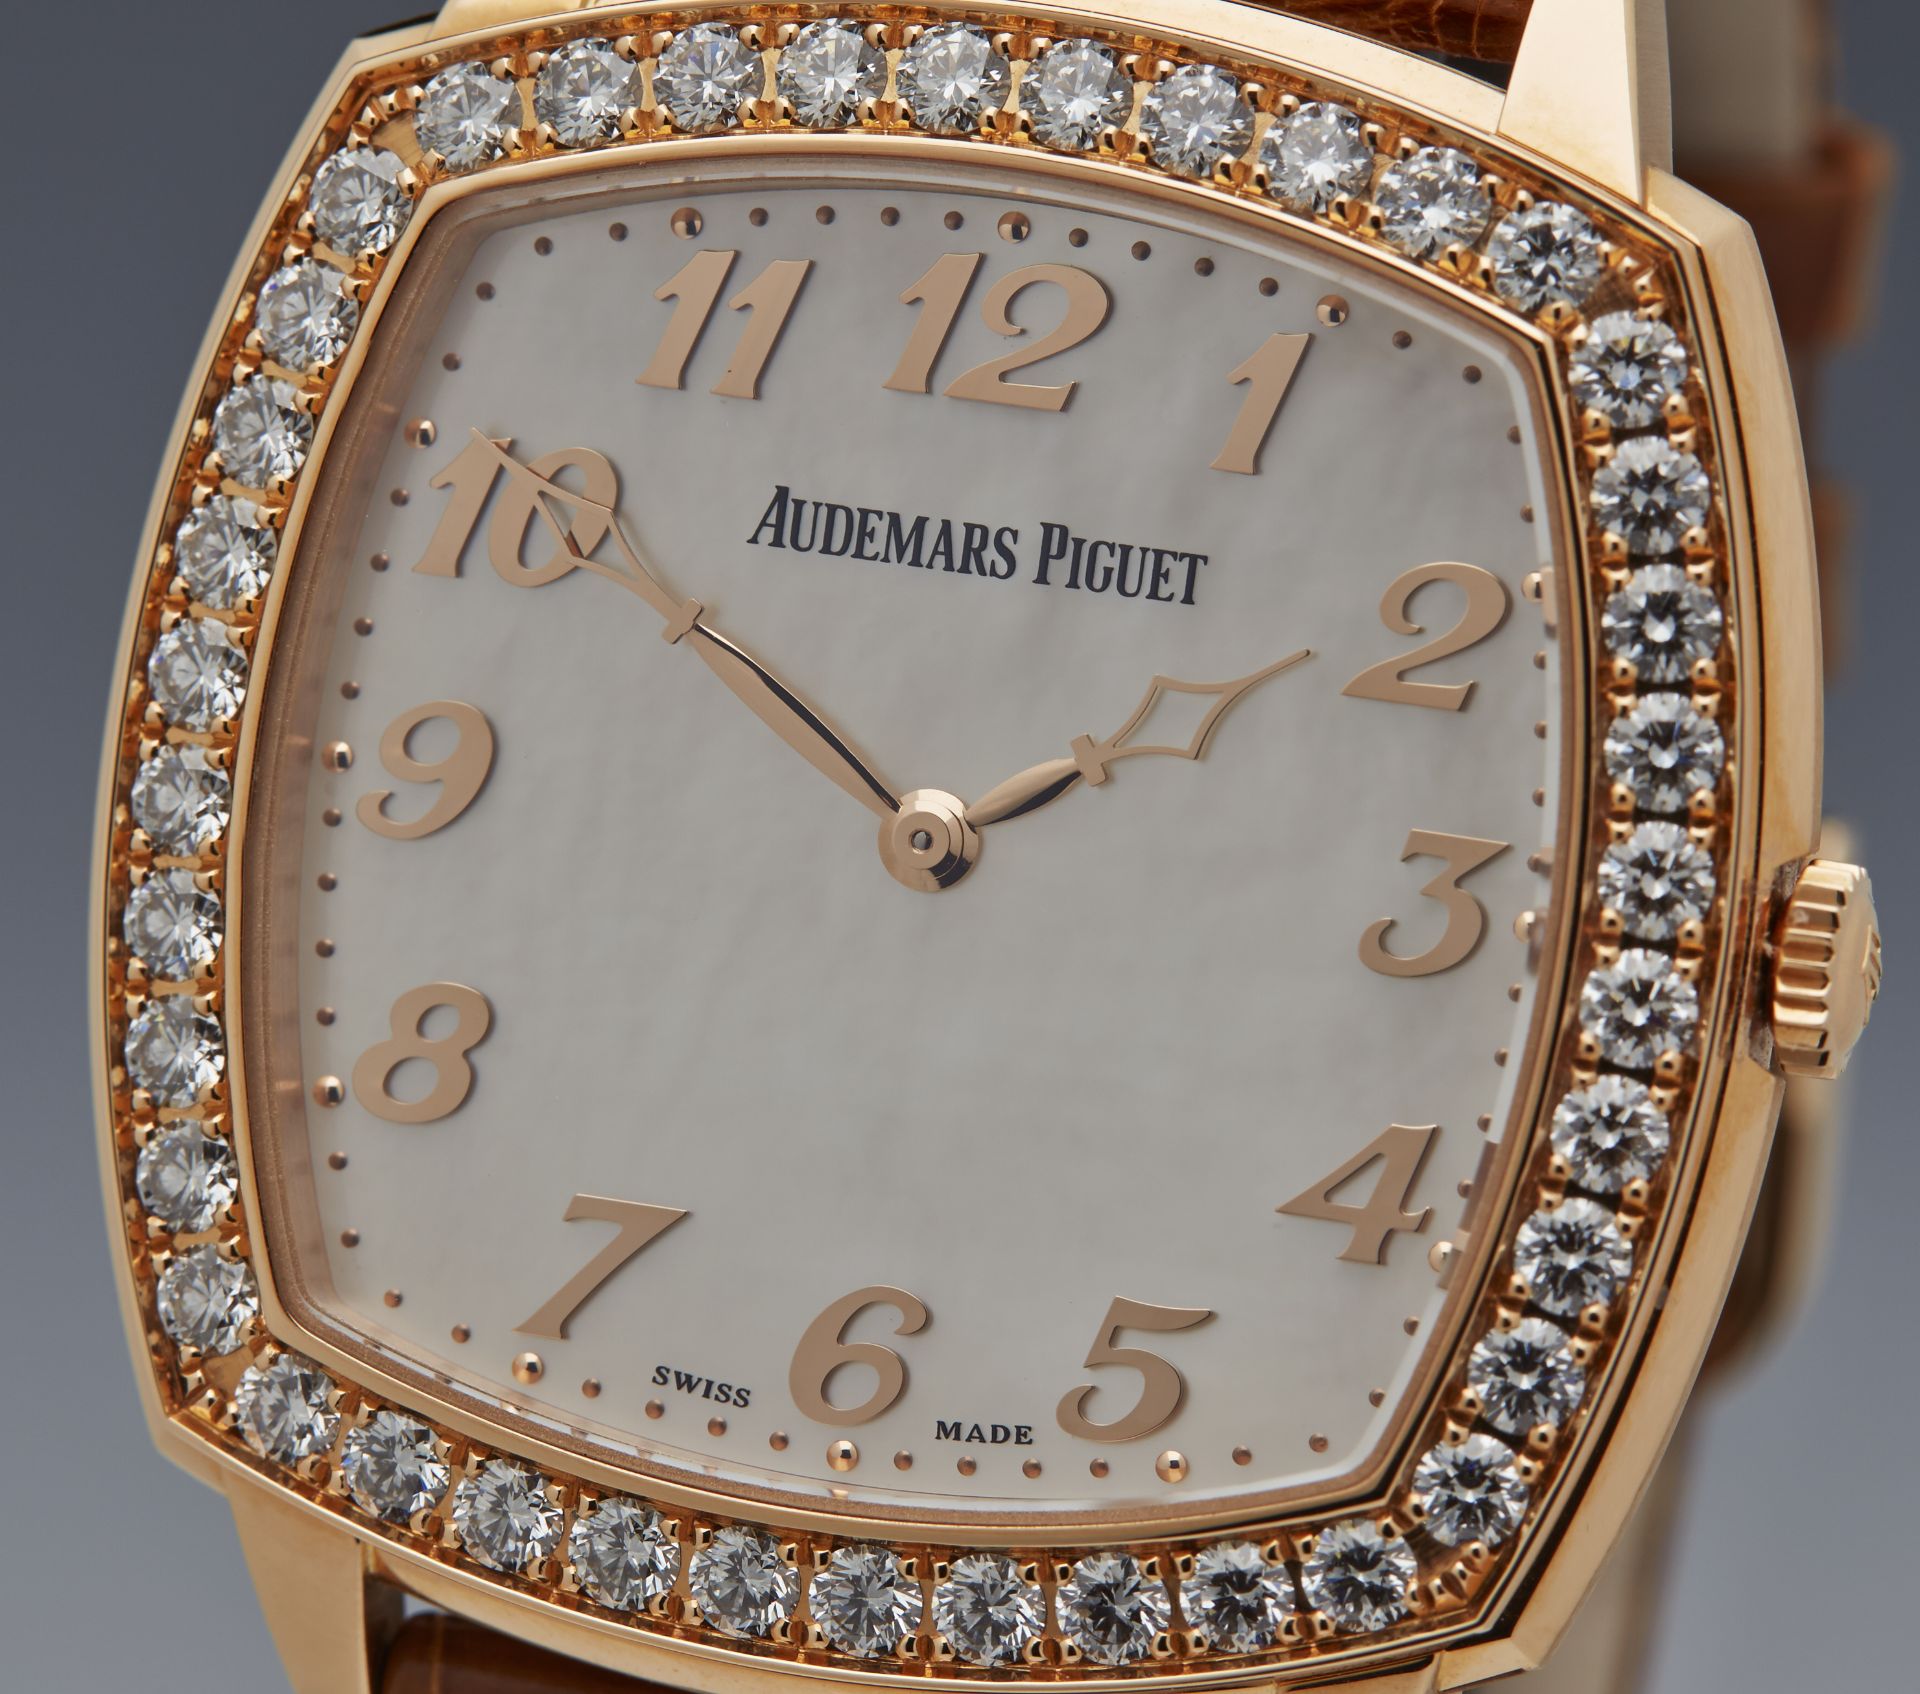 Audemars Piguet, Tradition Extra Thin 18k Rose Gold Diamonds MOP 15337OR.ZZ.A810CR.01 - Image 2 of 11